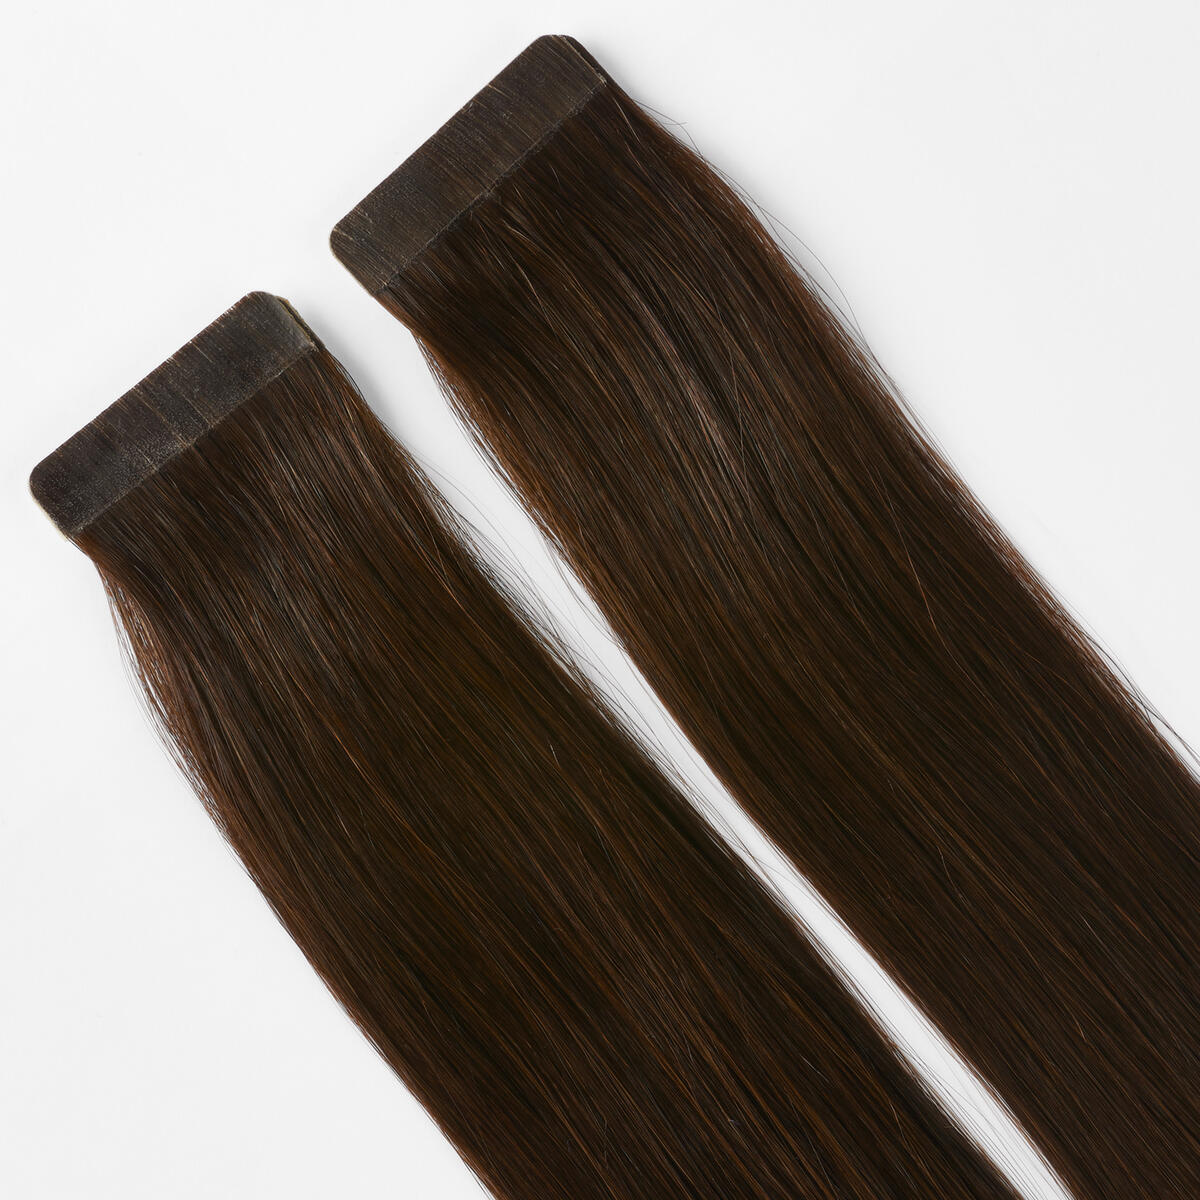 Basic Tape Extensions Classic 4 2.3 Chocolate Brown 60 cm